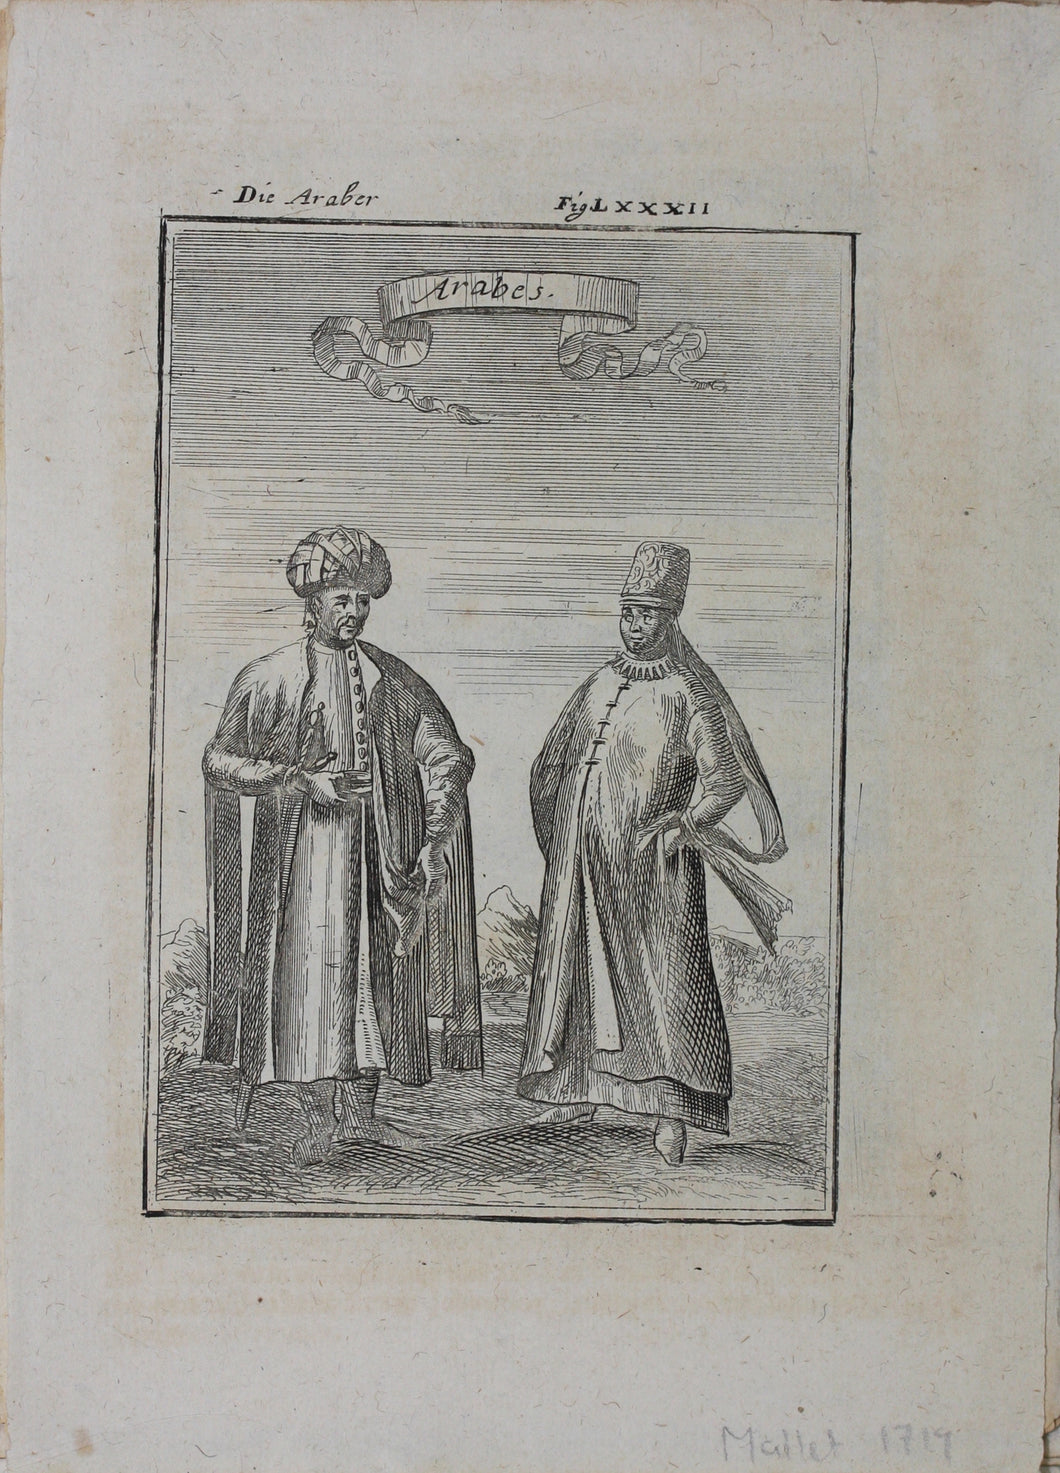 Alain Manesson Mallet. The Arabs. Engraving. 1719.